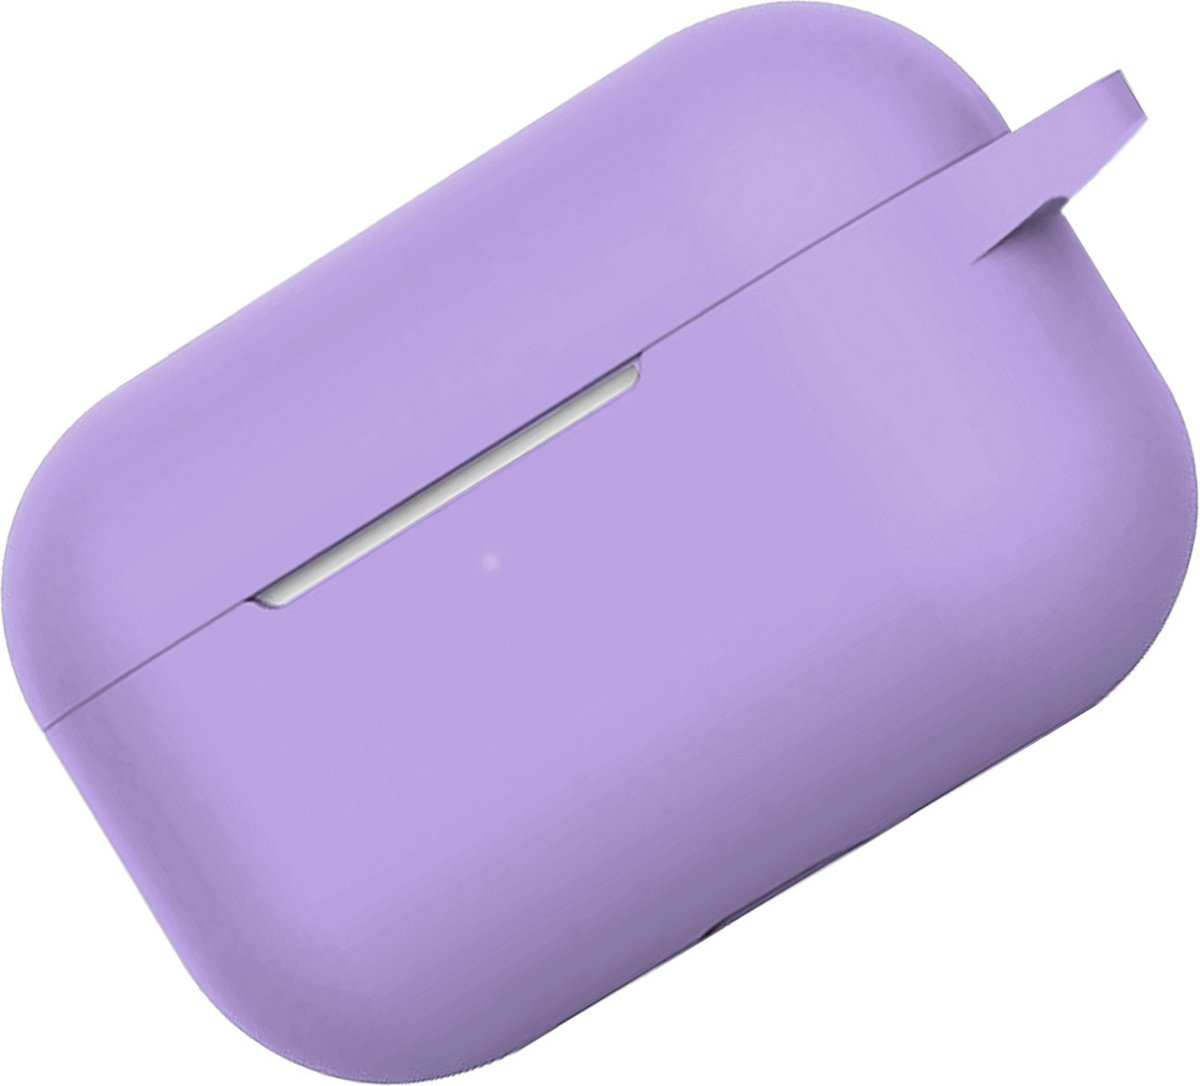 Hoes Geschikt voor Airpods Pro Hoesje Cover Silicone Case Hoes - Lila